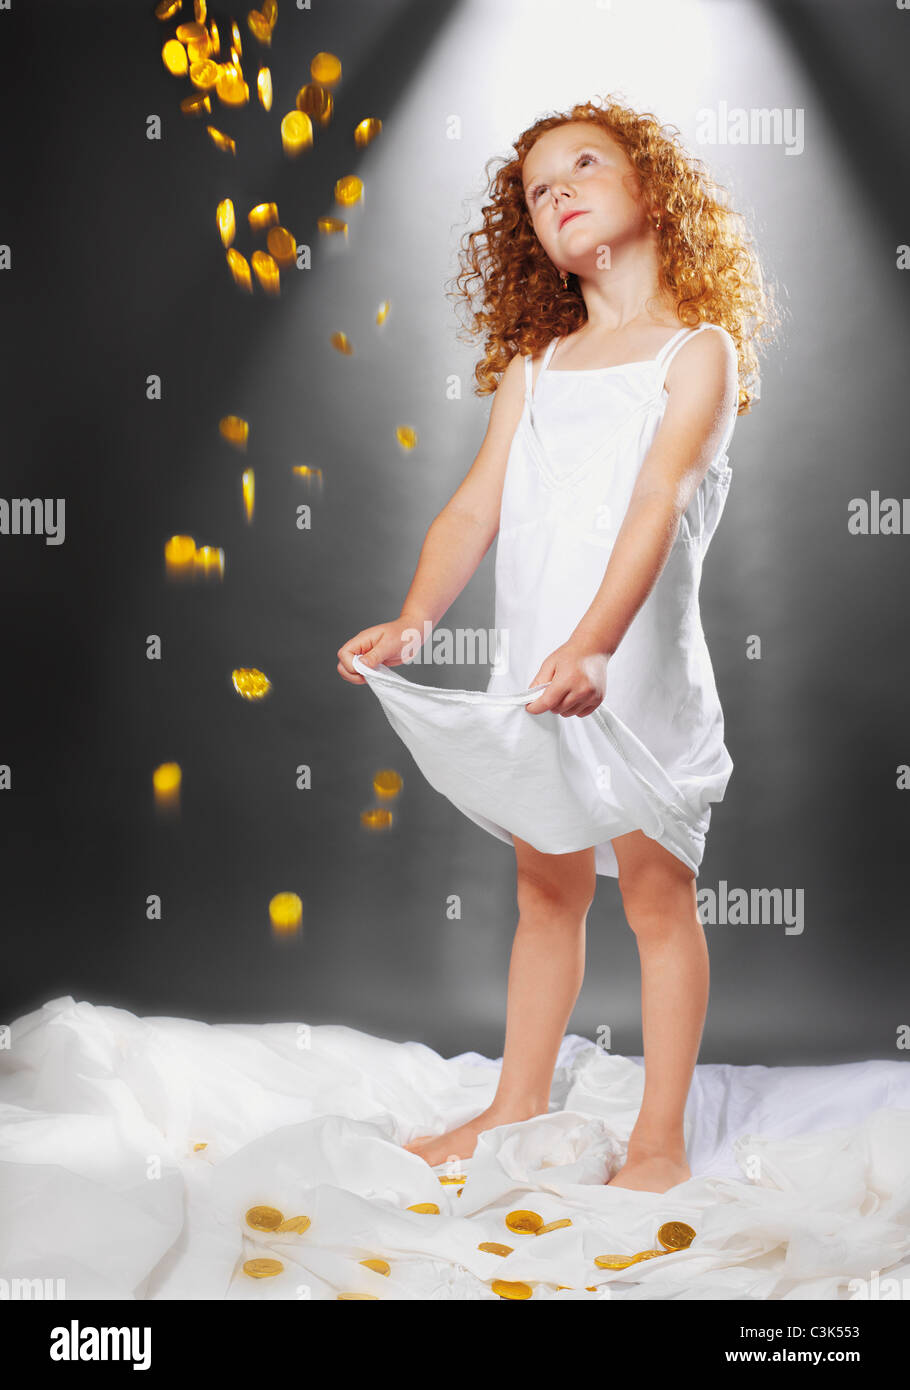 Girl catching shower of gold coins in dress Stock Photo